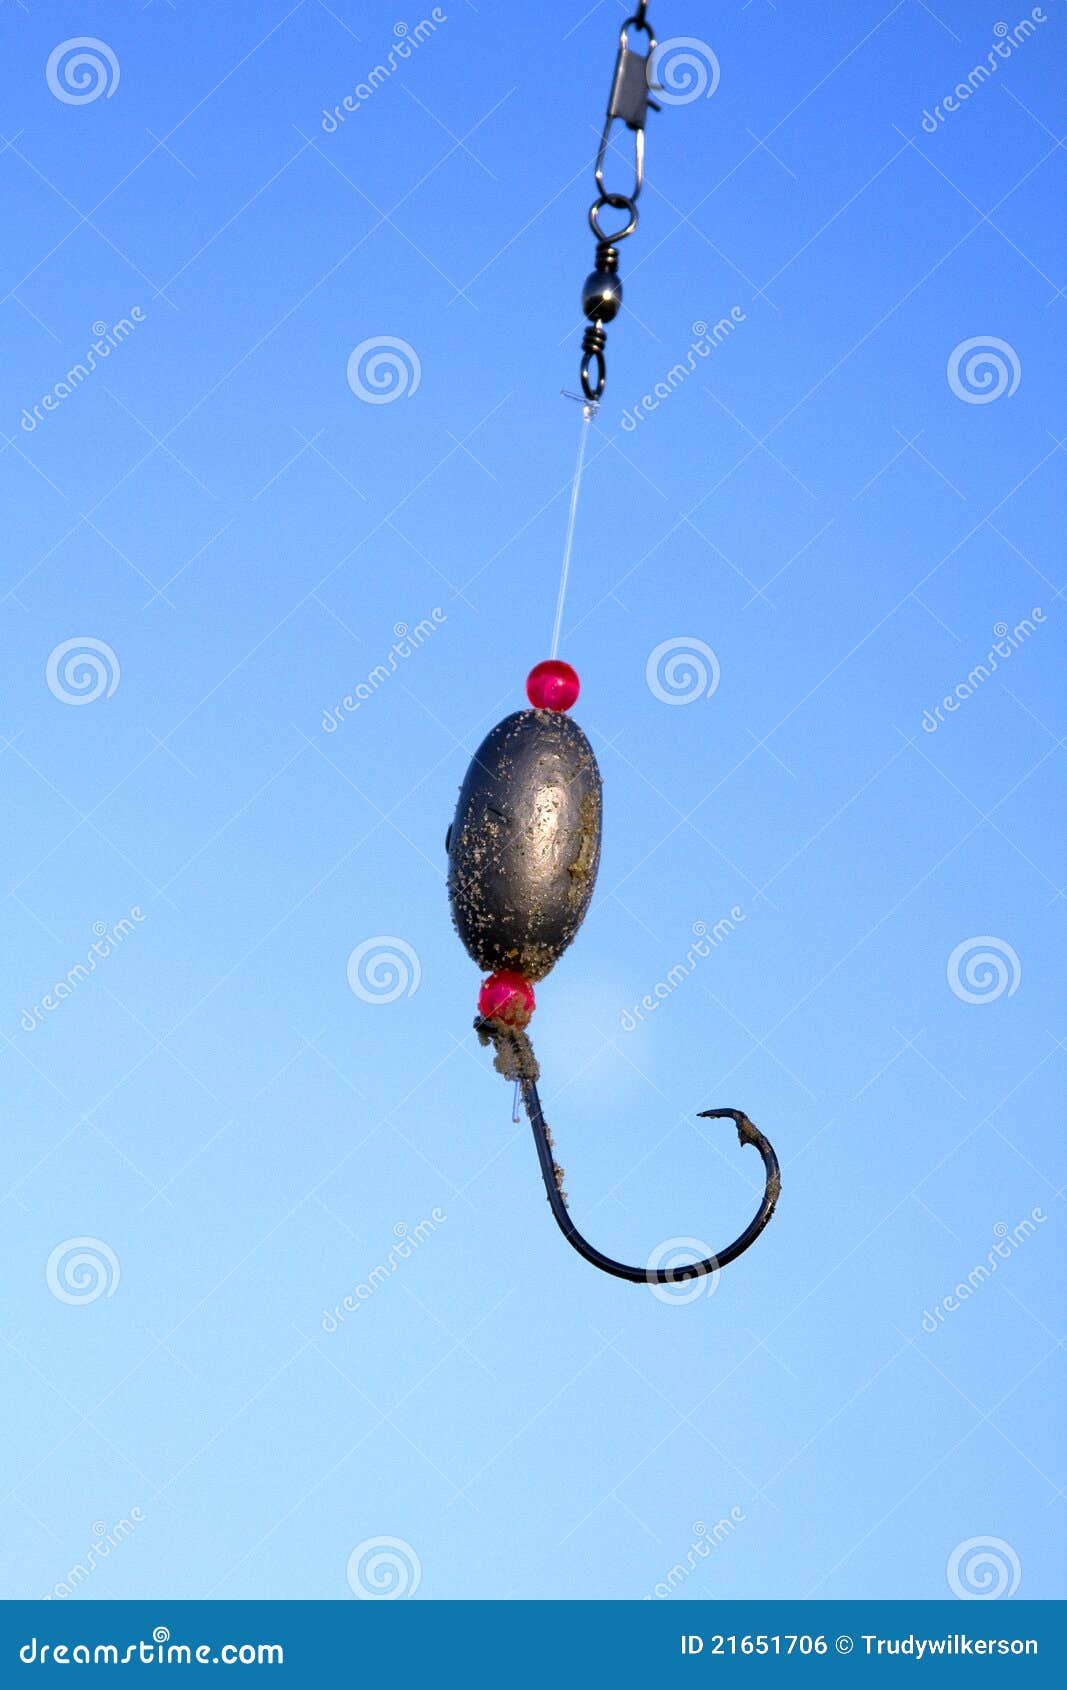 Hook, Line and Sinker stock photo. Image of pole, recreation